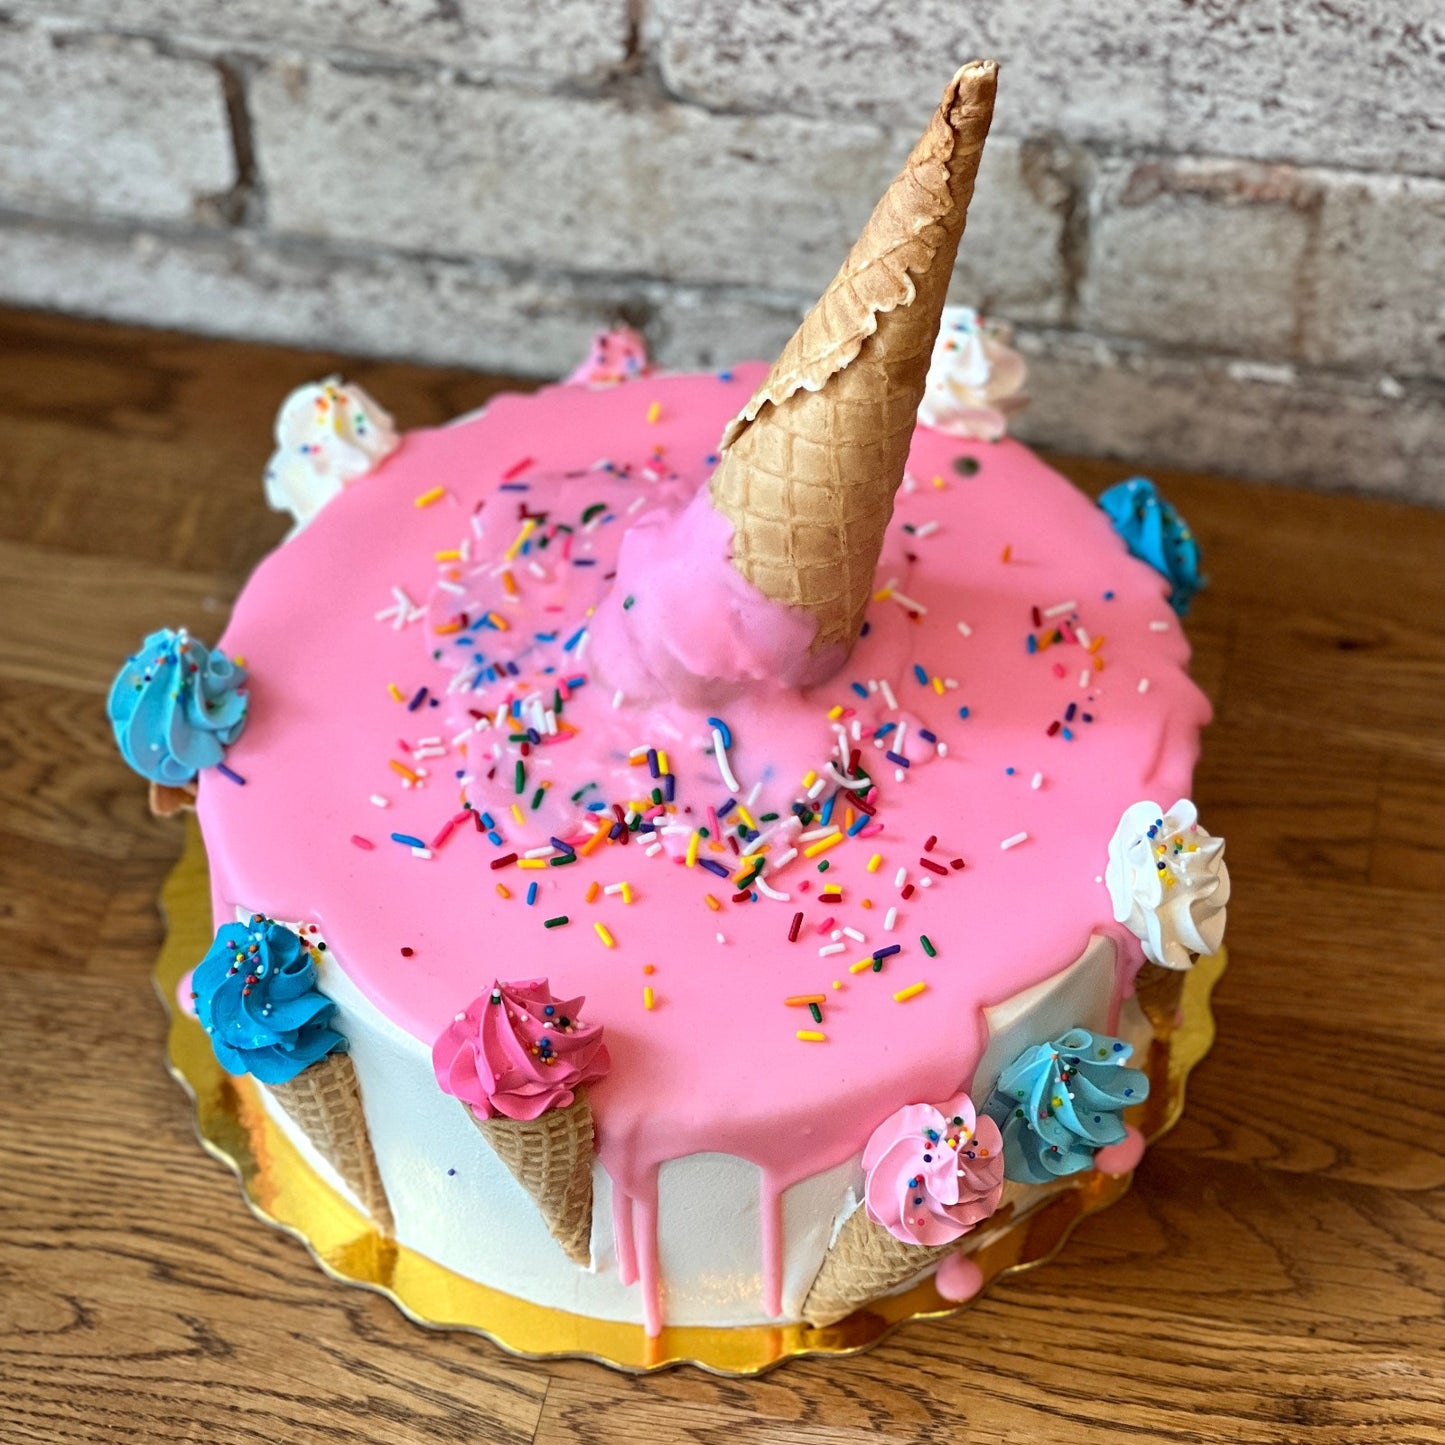 Ice cream cake with upside down cone on top